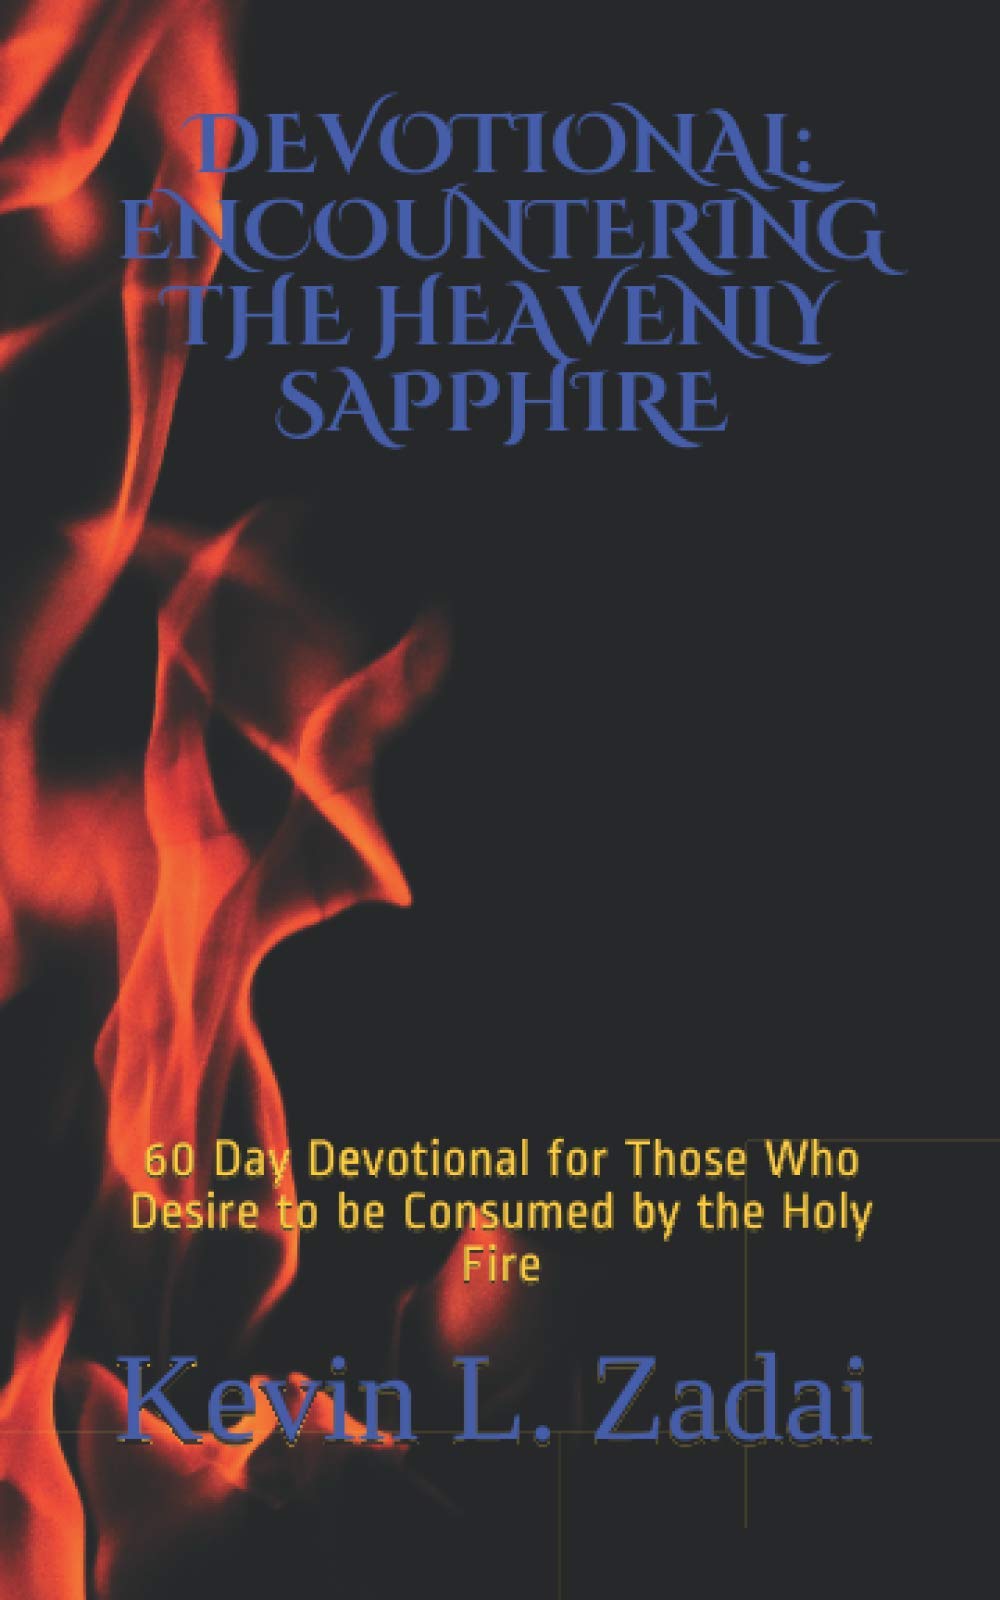 Encountering The Heavenly Sapphire: 60 Day Devotional for Those Who Desire to be Consumed by The Holy Fire